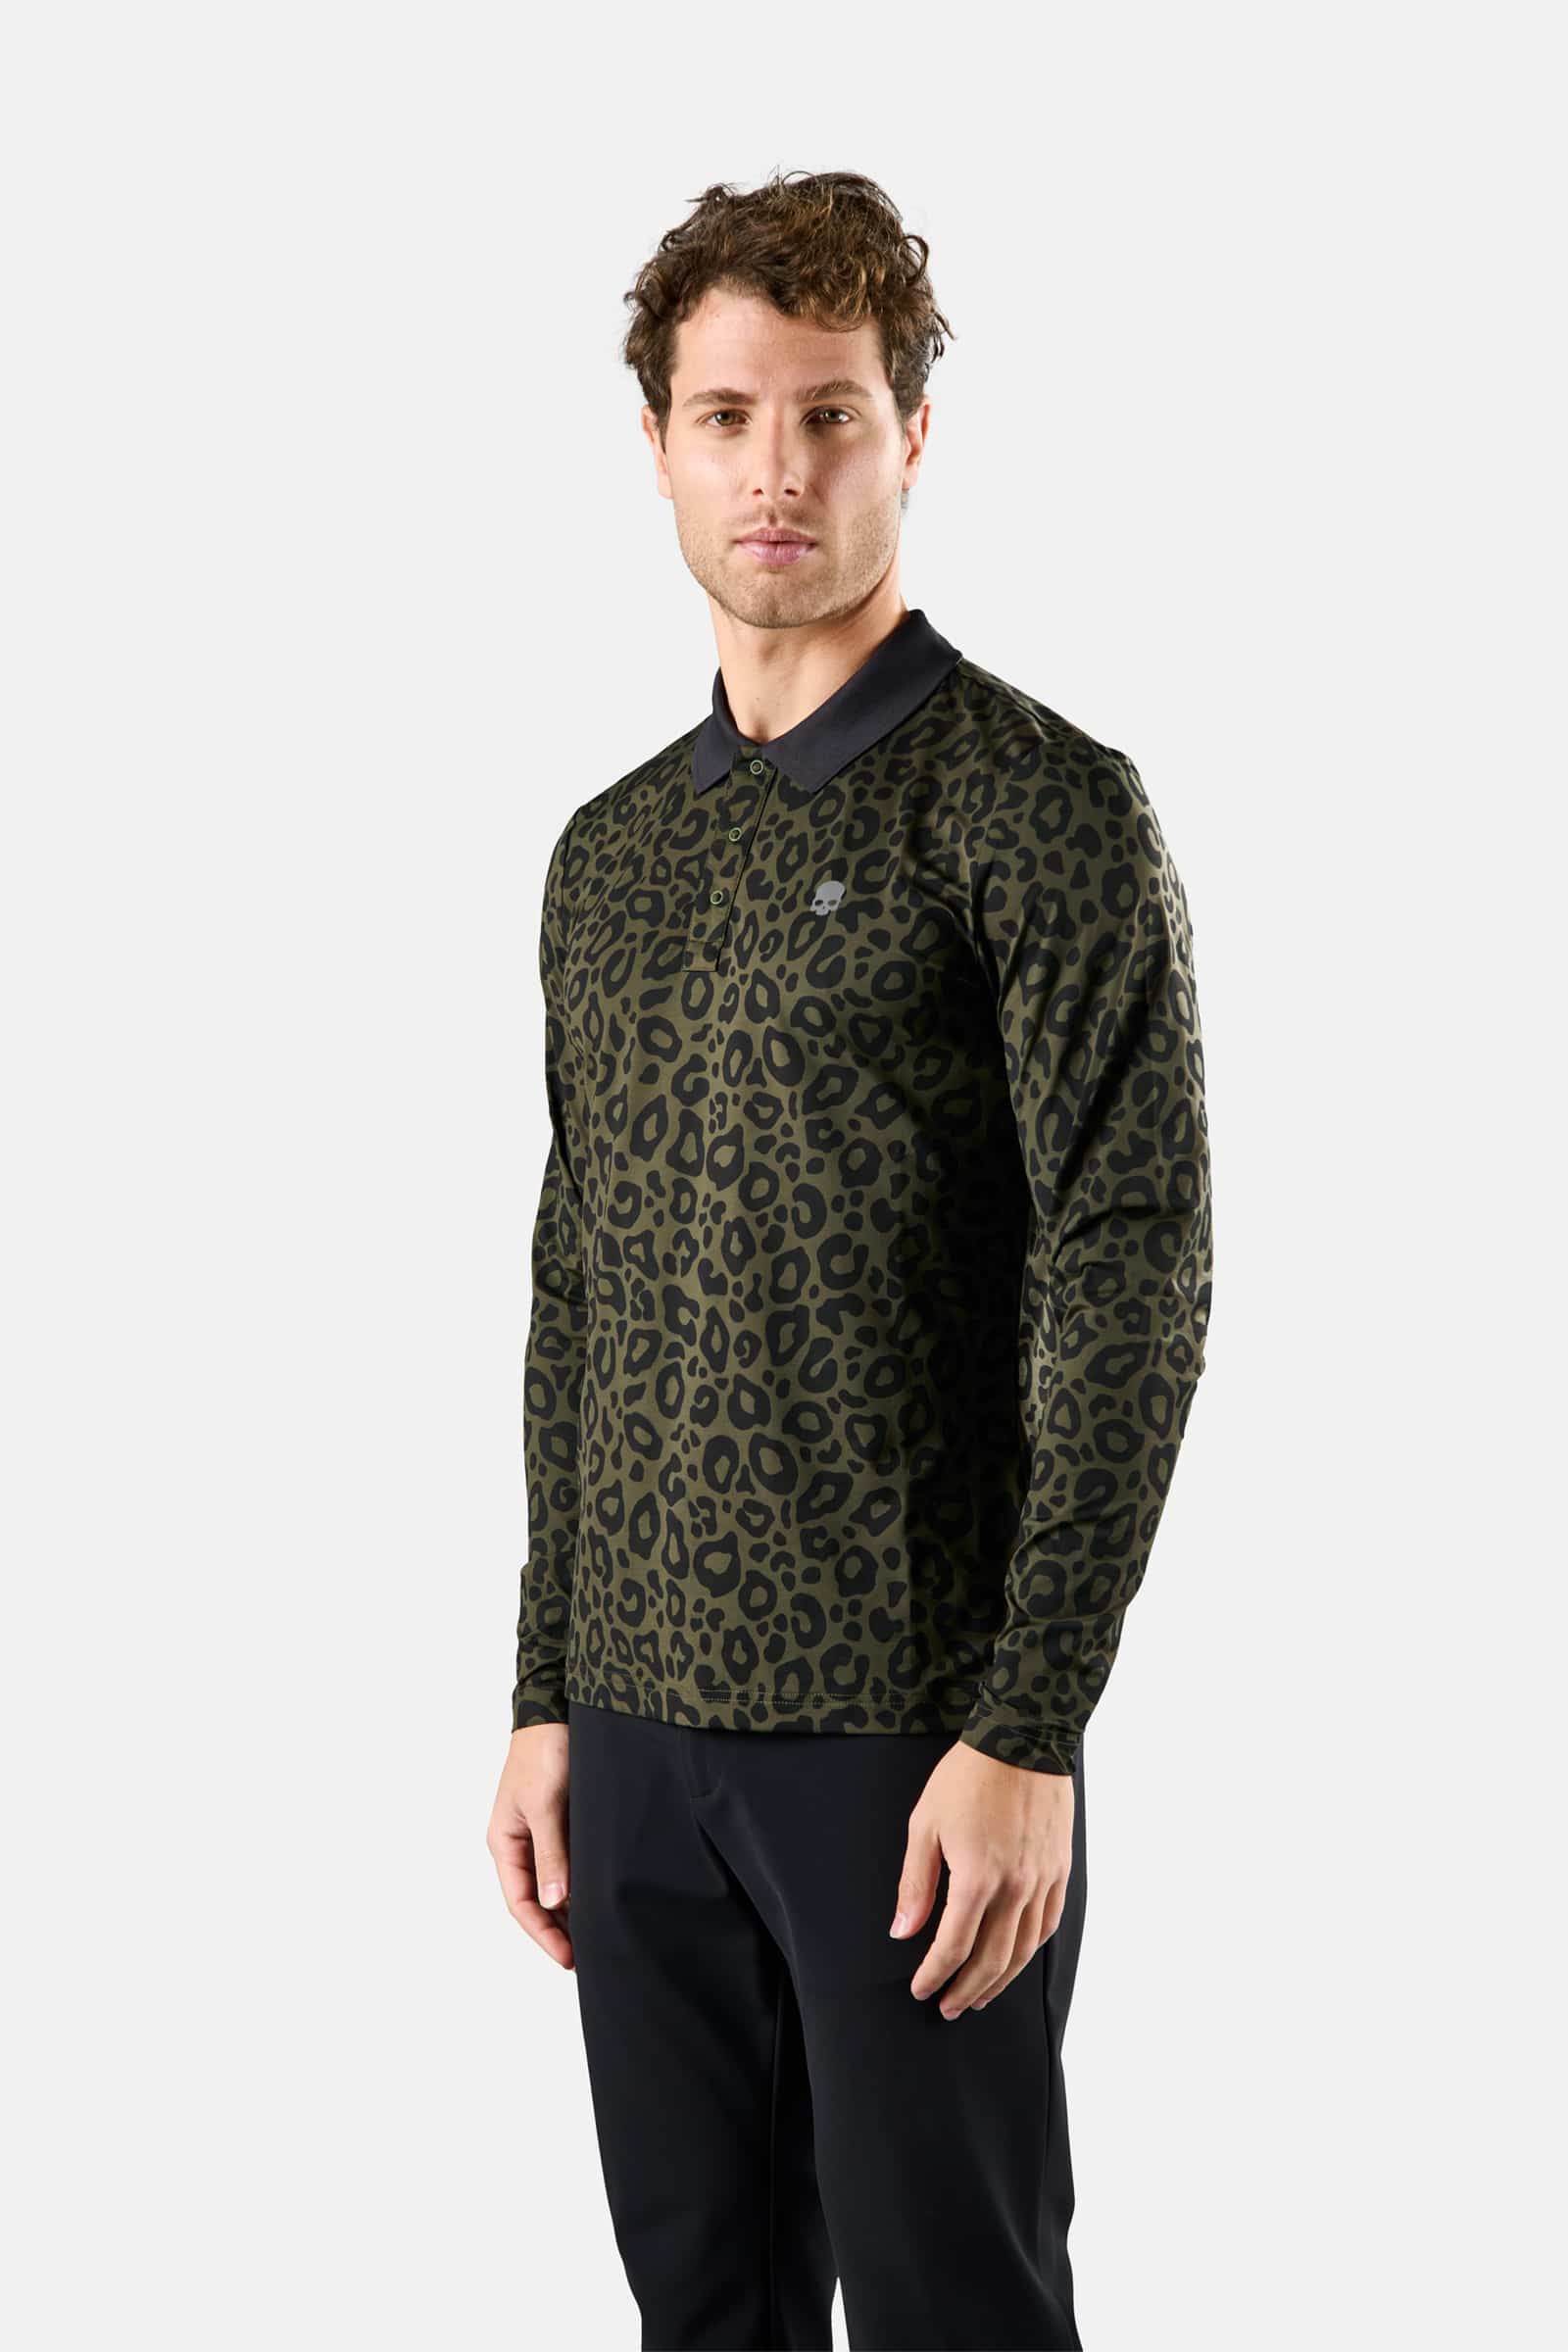 PRINTED POLO LS - MILITARY GREEN,PANTHER - Hydrogen - Luxury Sportwear